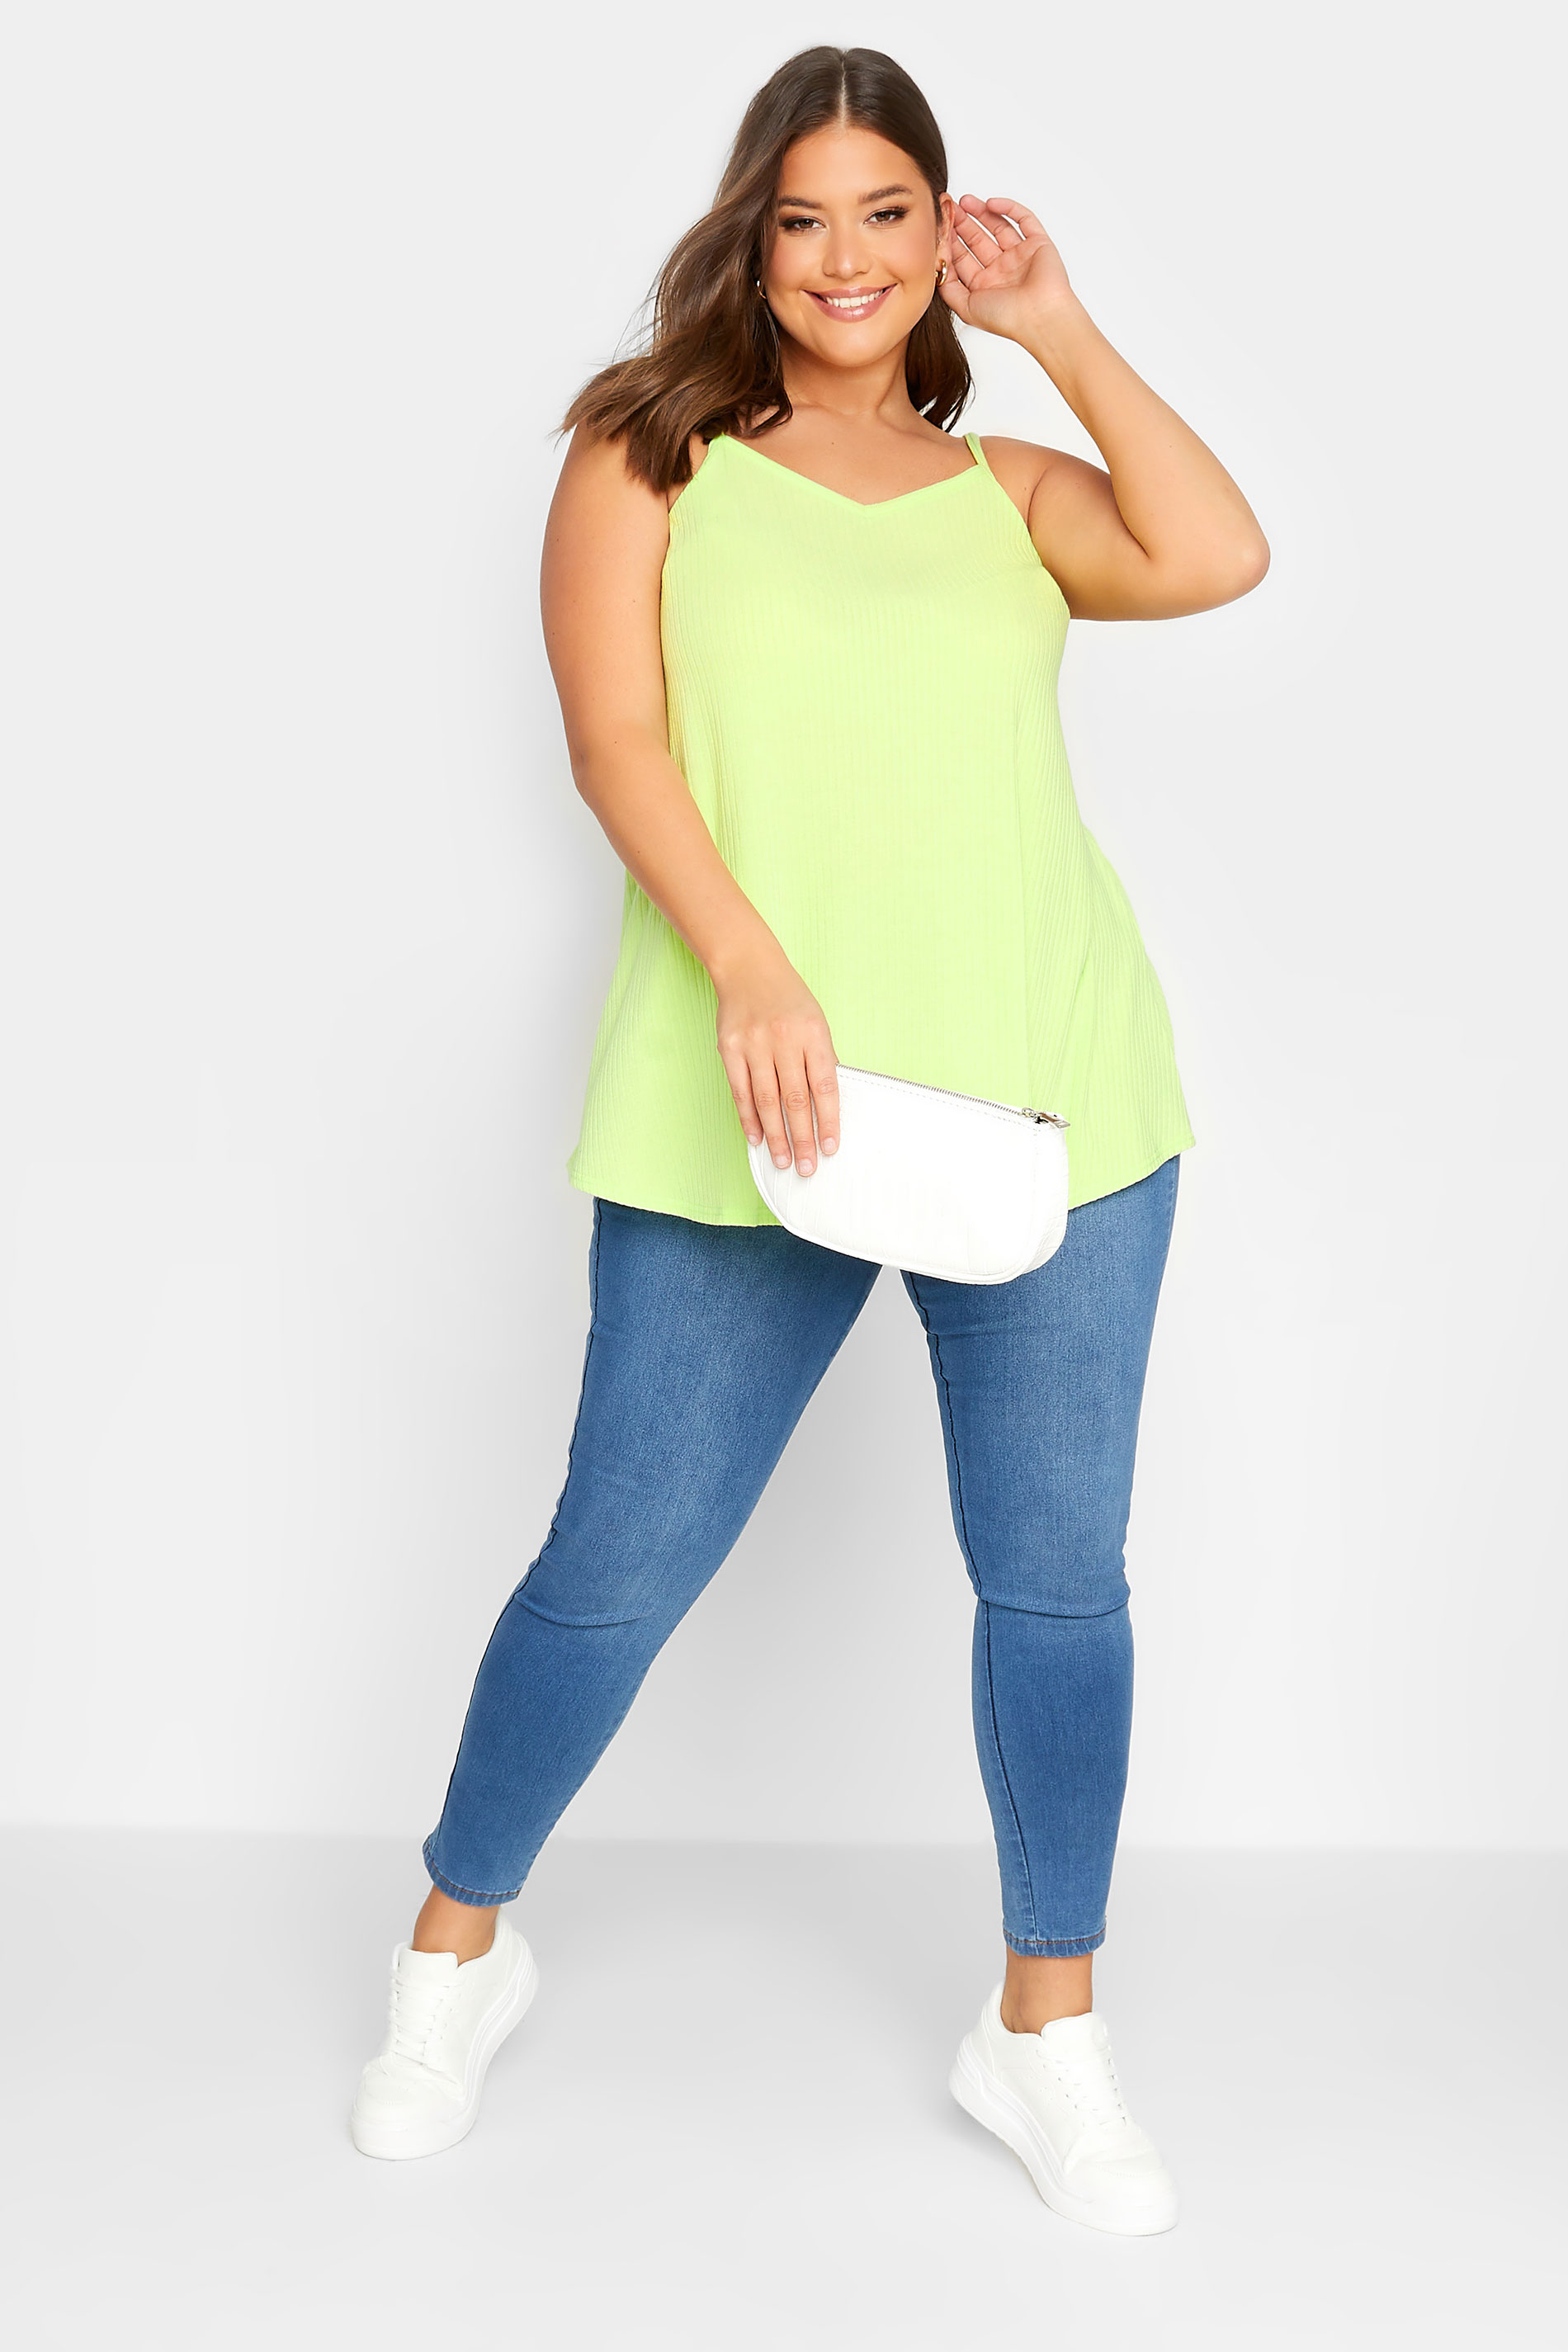 LIMITED COLLECTION Plus Size Bright Green Satin Cami Top